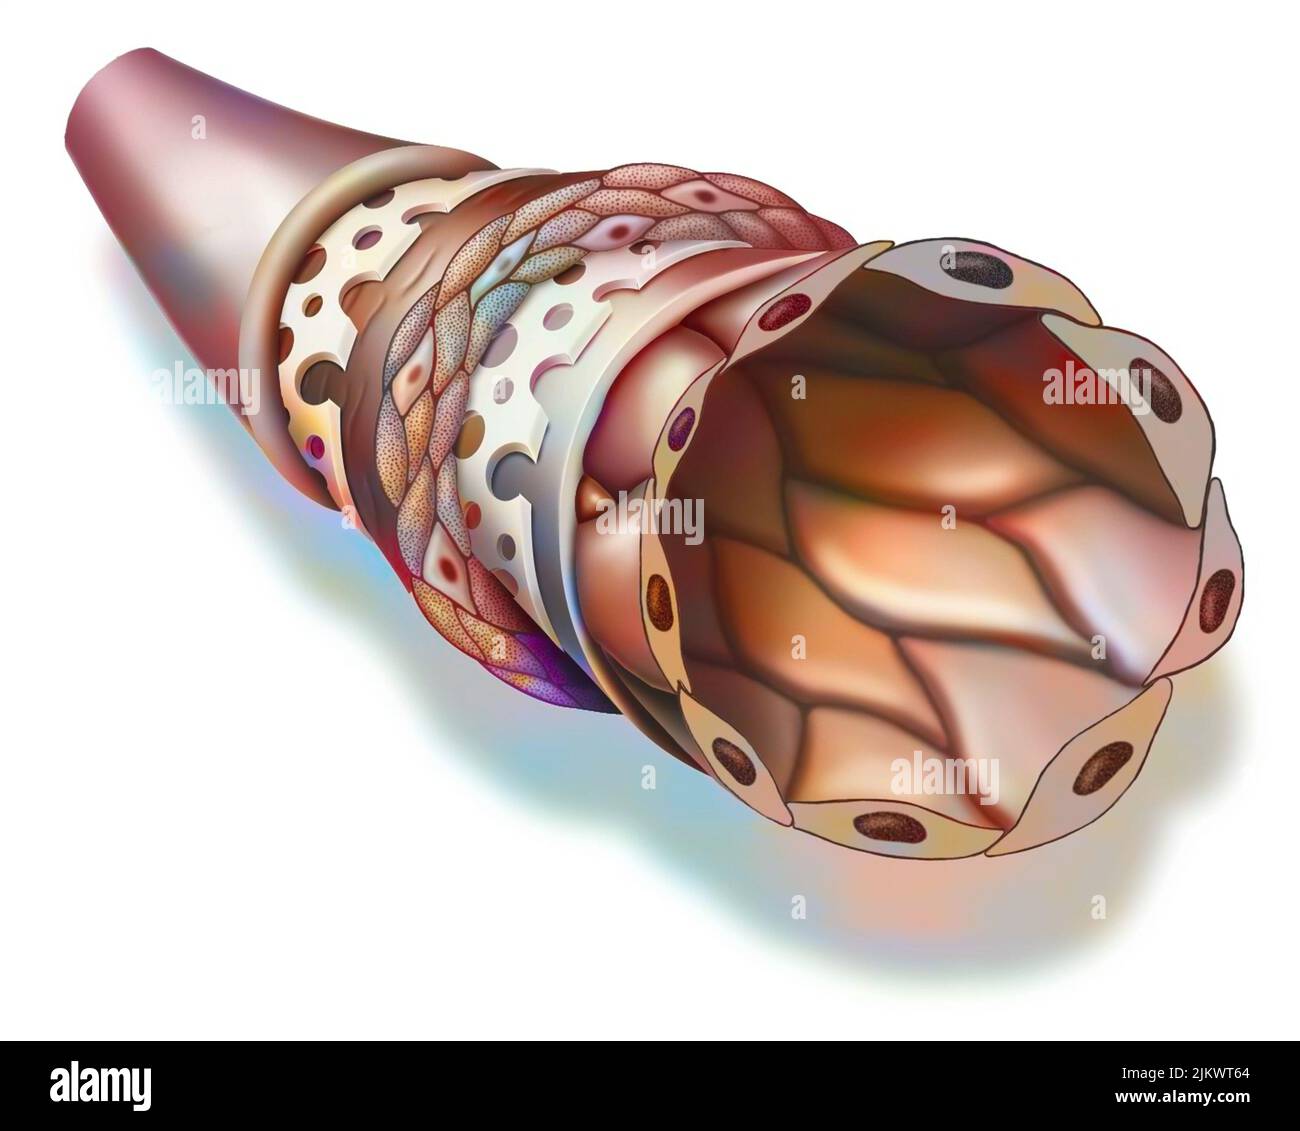 Different walls constituting an artery: collagen and elastic tissues, smooth muscle. Stock Photo